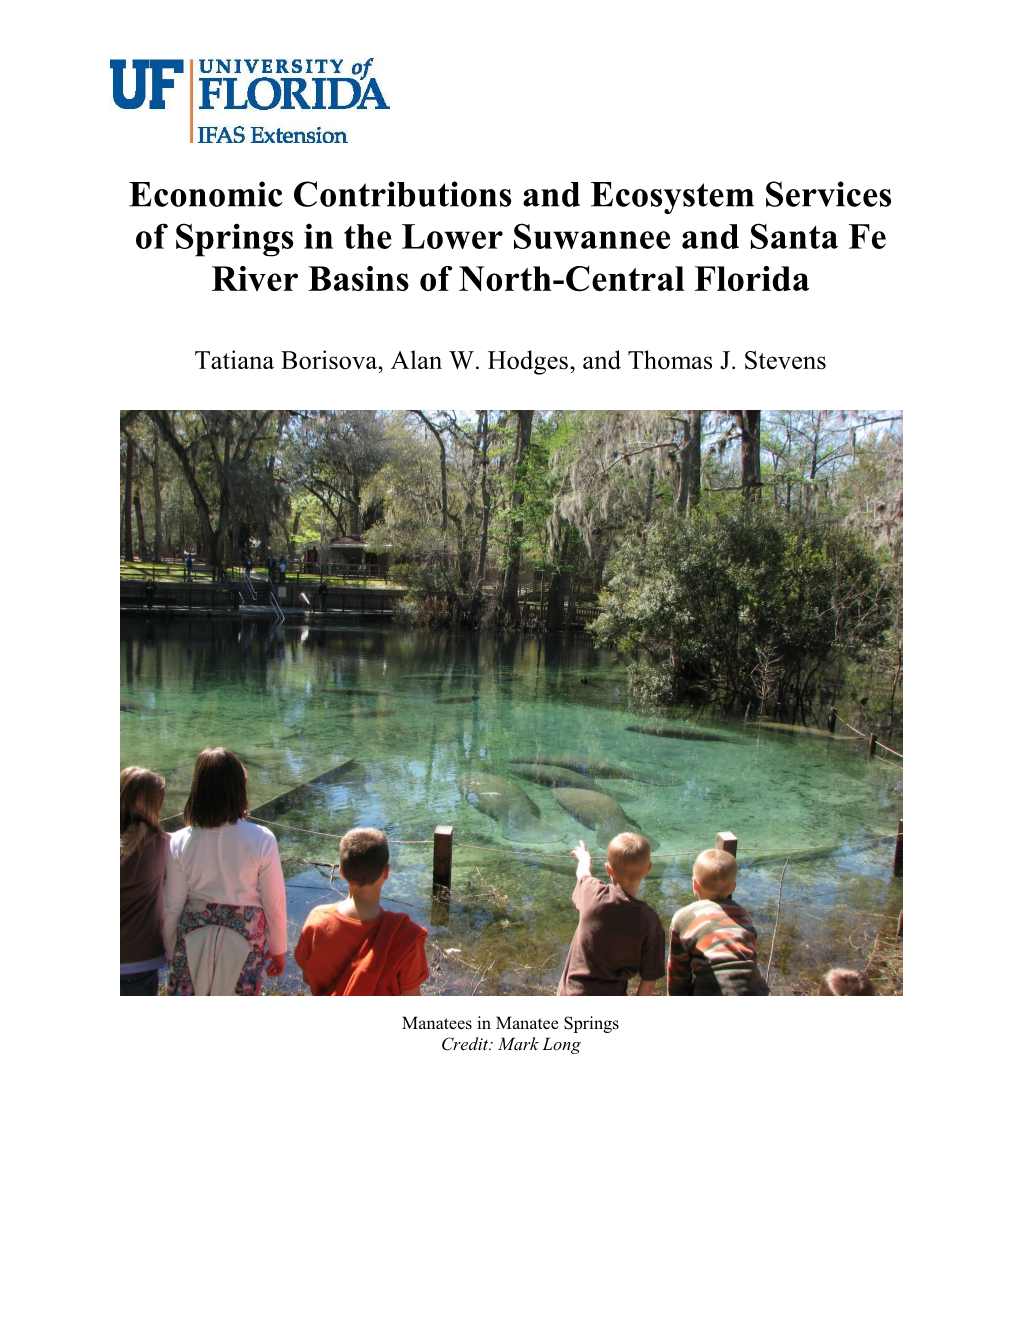 Economic Contributions and Ecosystem Services of Springs in the Lower Suwannee and Santa Fe River Basins of North-Central Florida